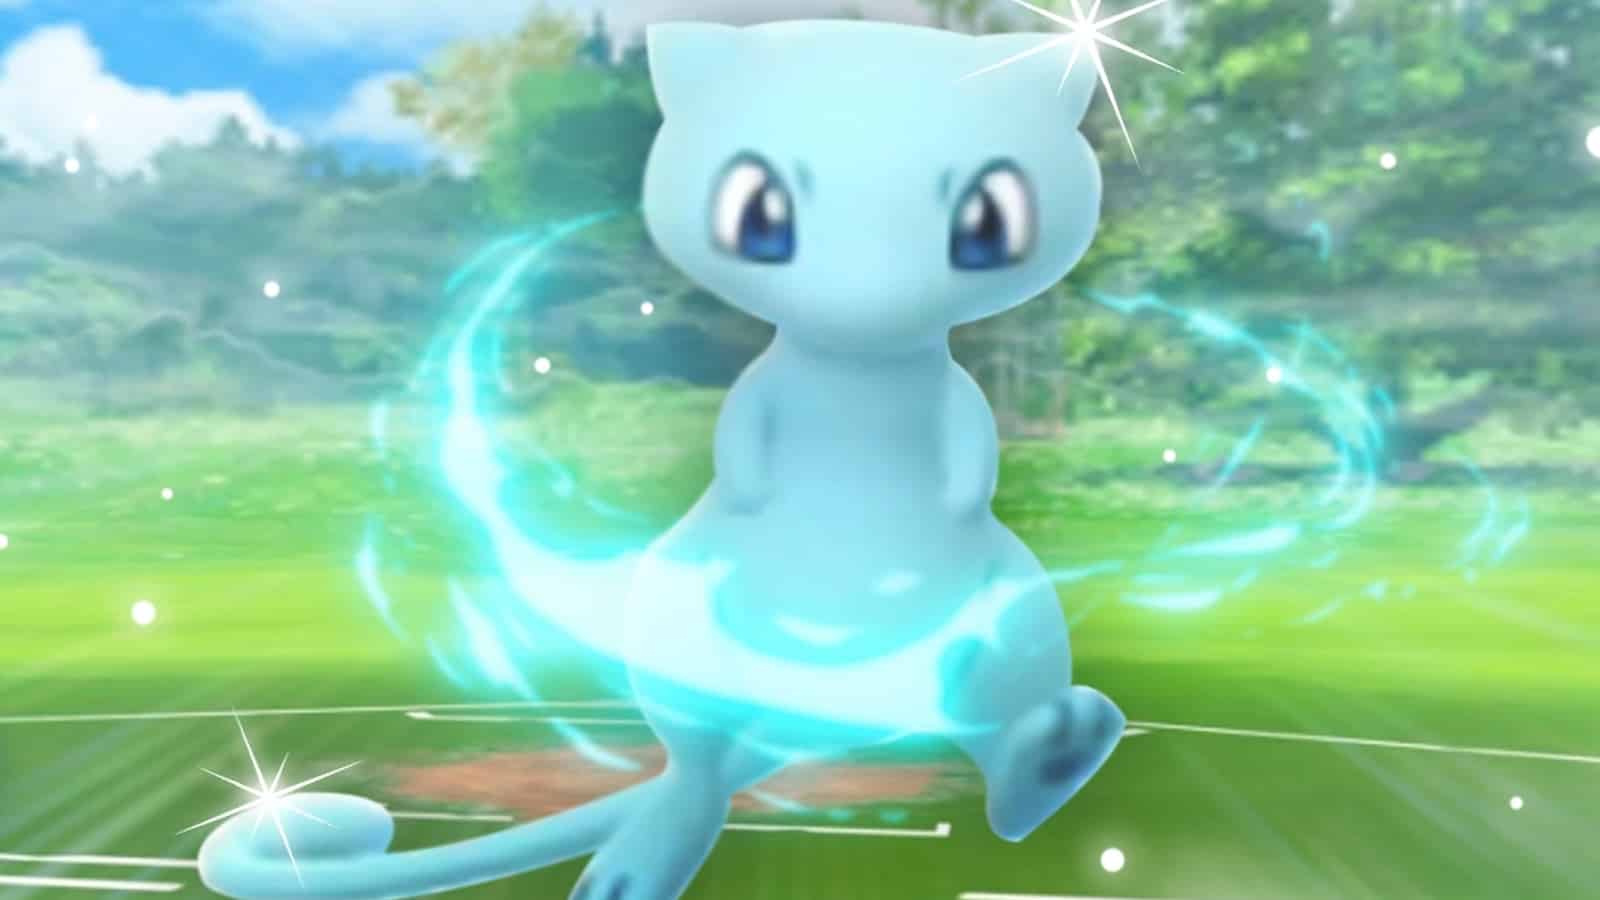 Pokemon GO: Can Mew be Shiny in-game? (December 2022)